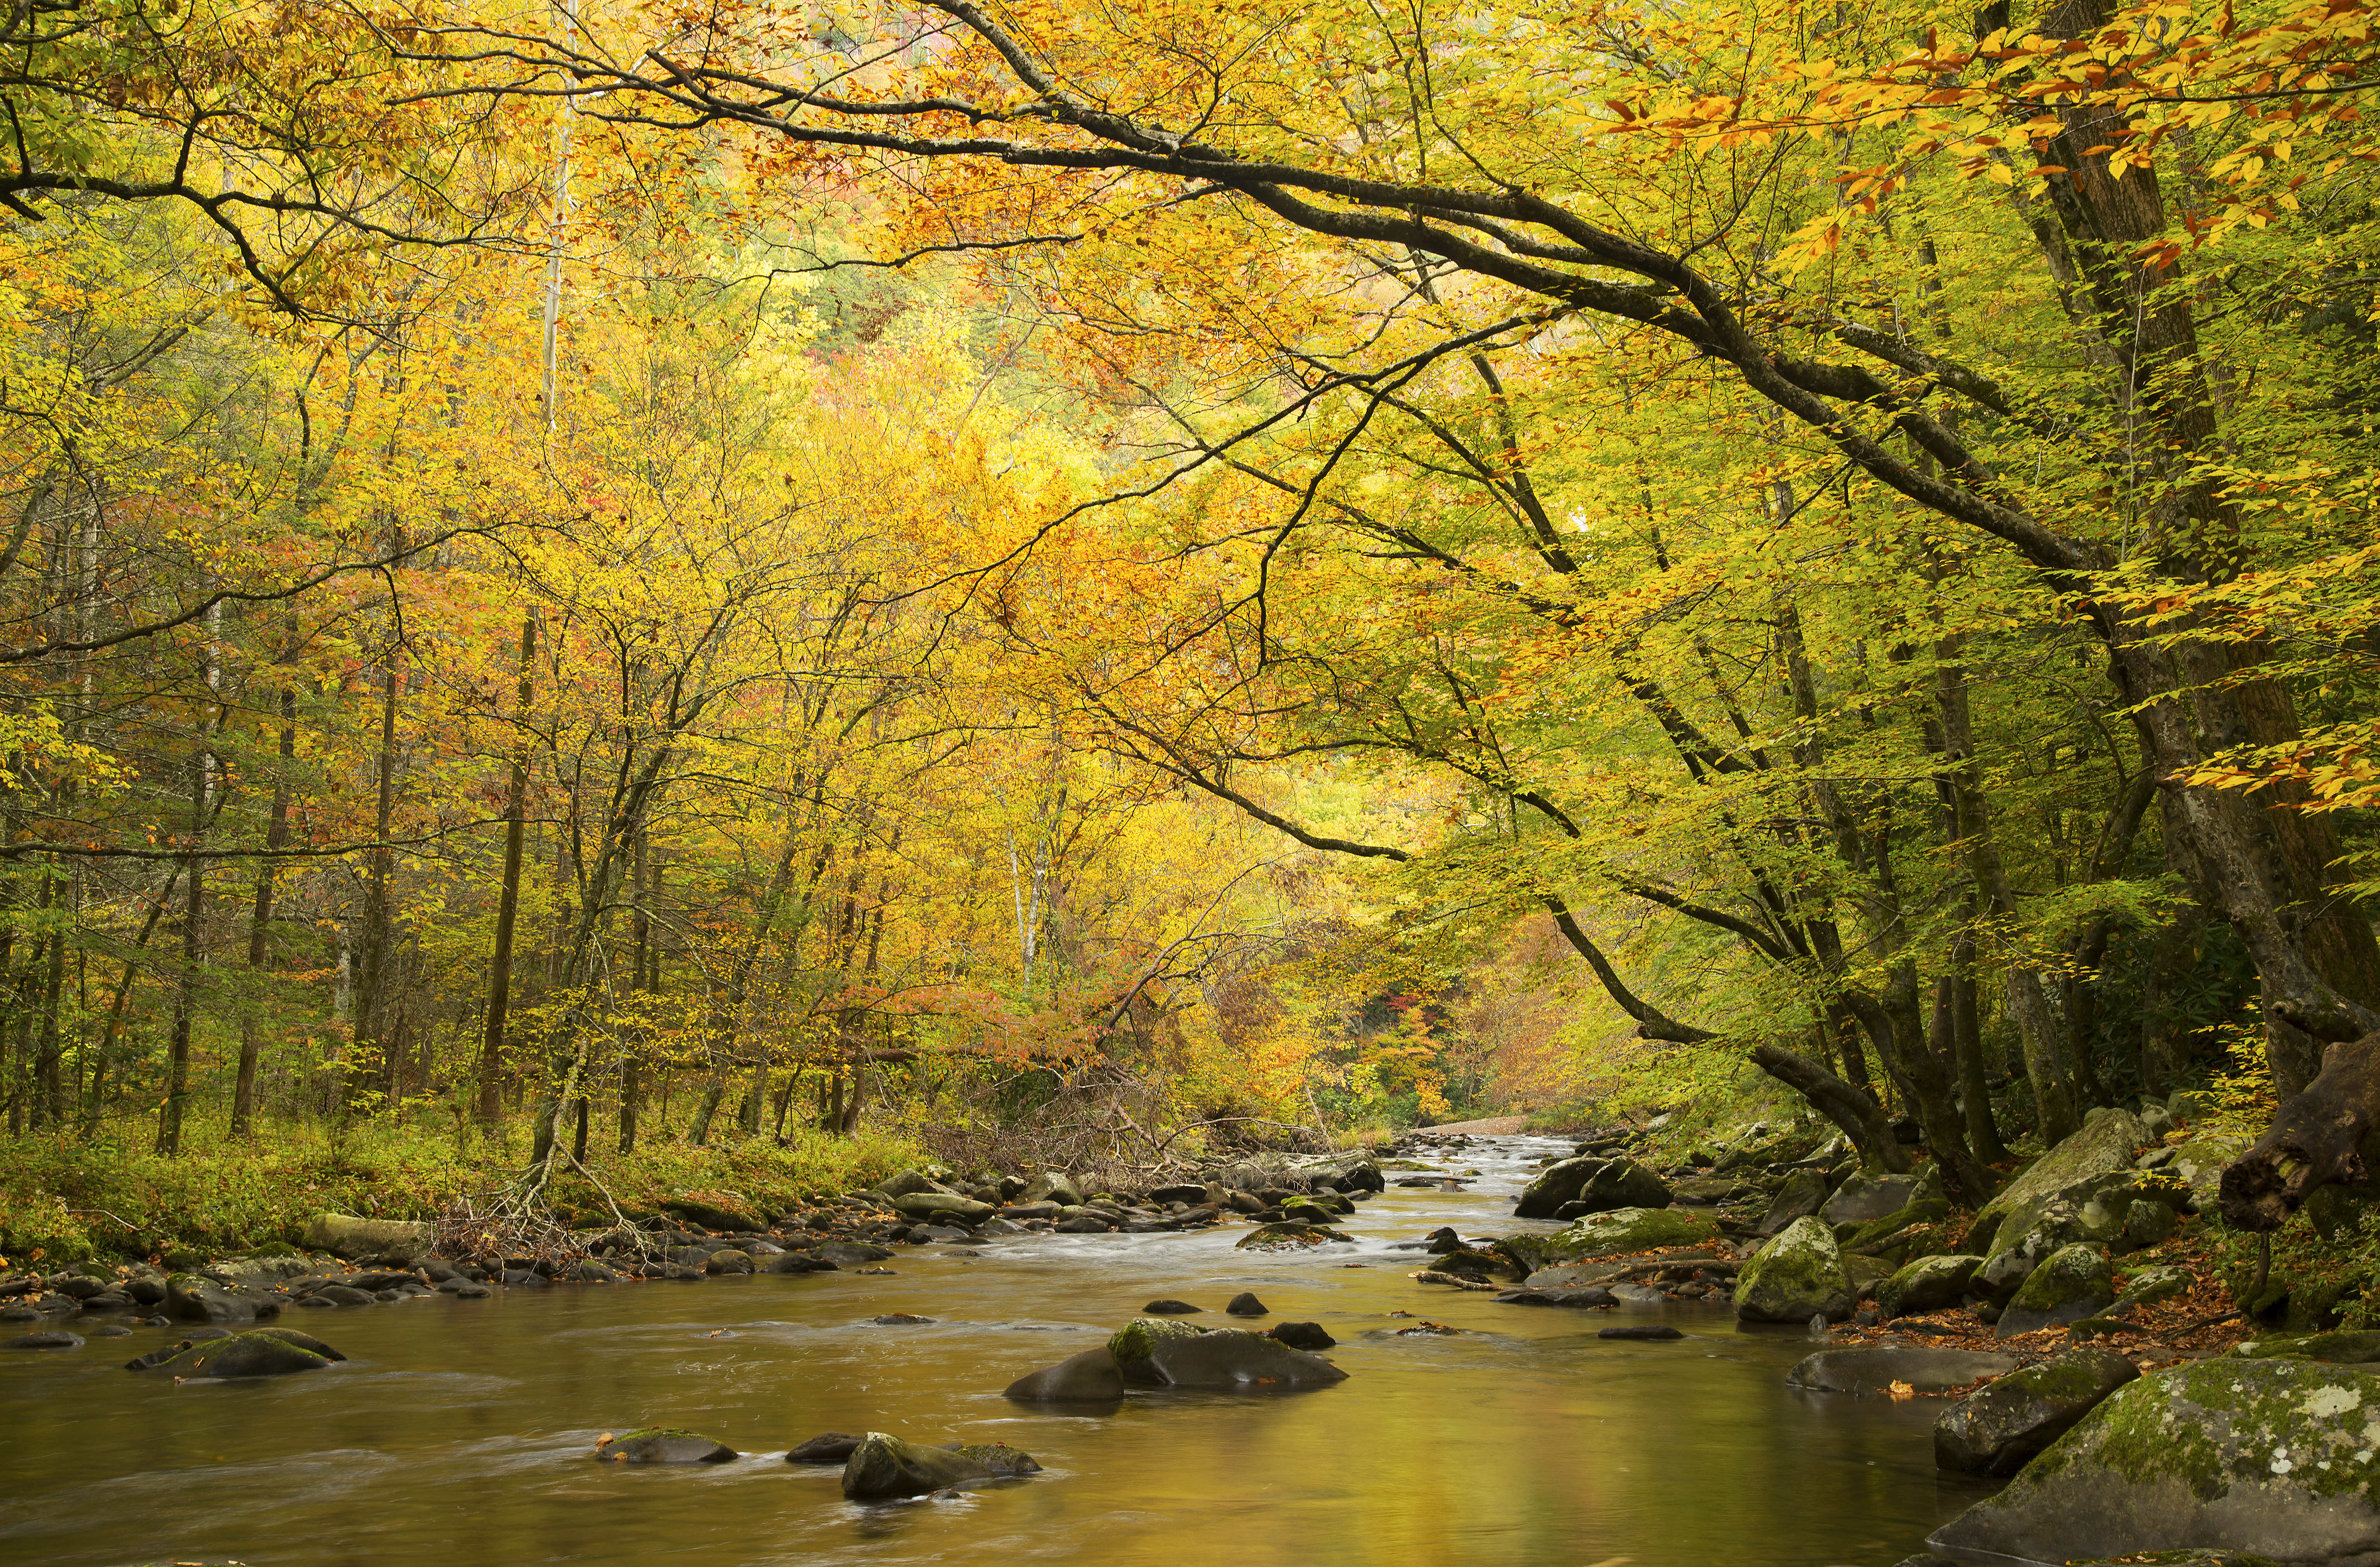 Golden colored fall leaves and still waters in the Smoky Mountains of Tennessee